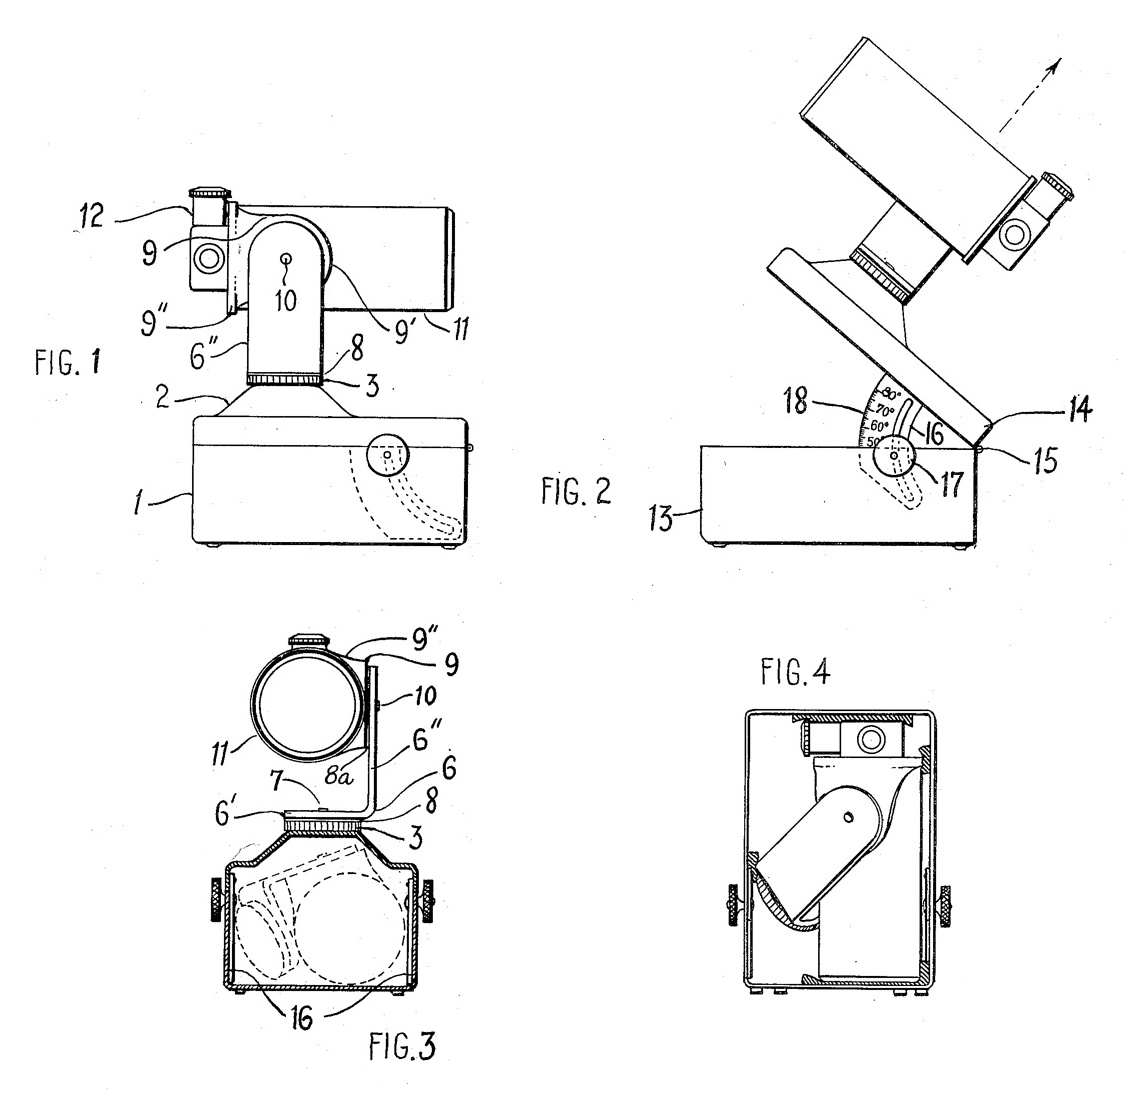 Figures 1 to 4 from U.S. Patent #2,693,032